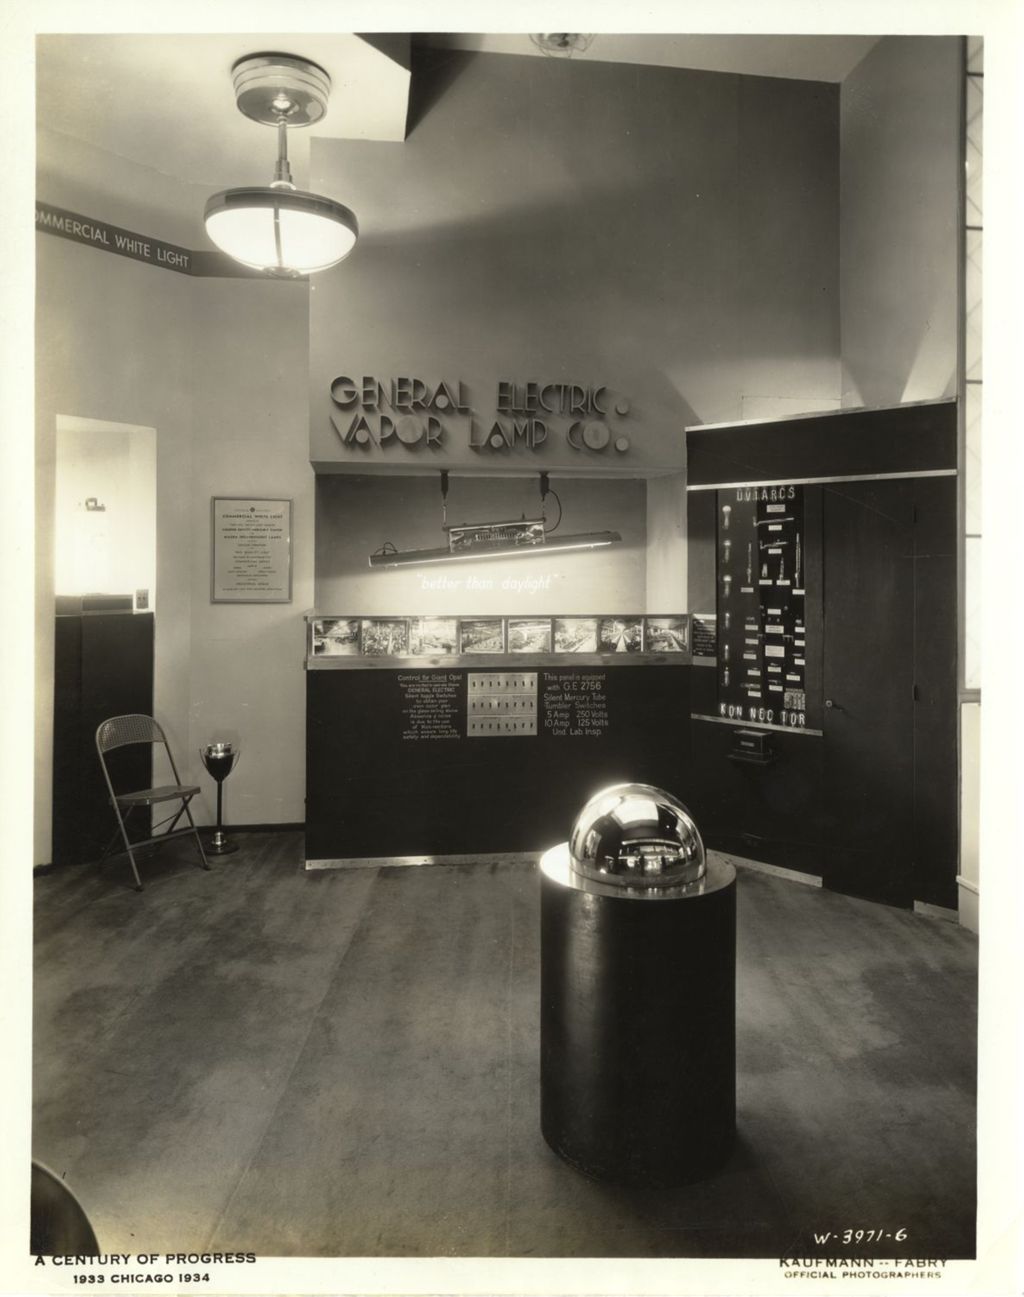 General Electric Vapor Lamp Company exhibit at the Electrical Building